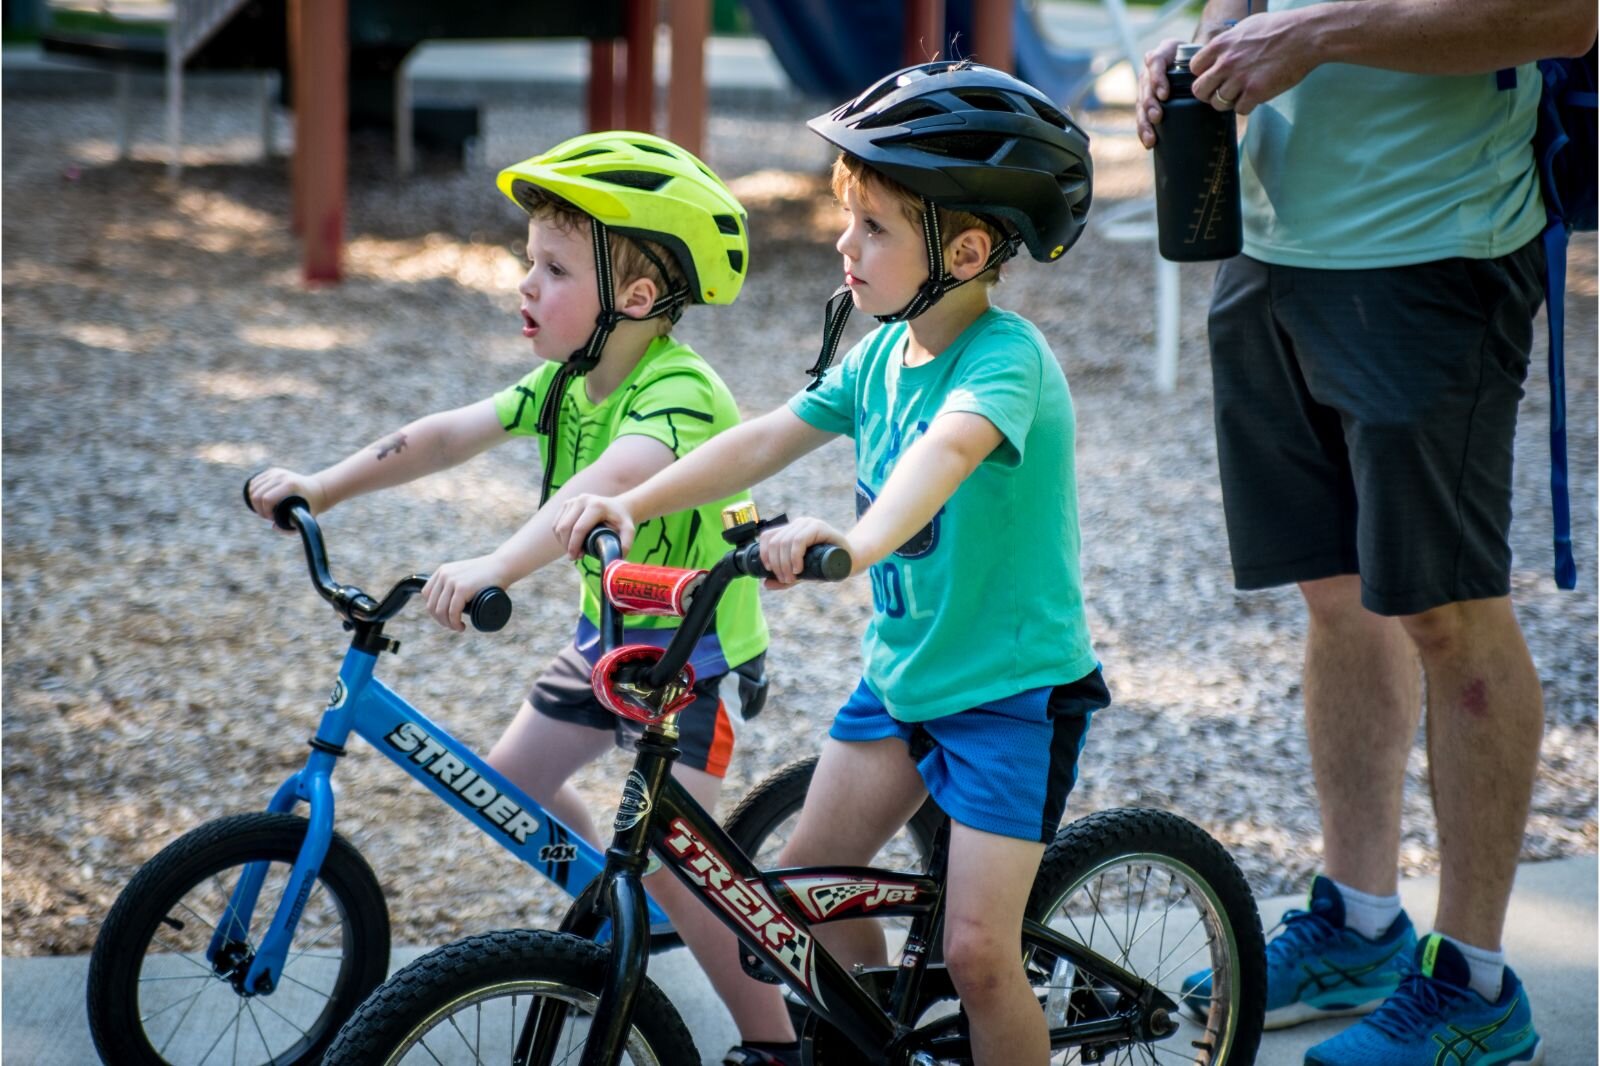 Youngsters on their bikes were among those enjoying the festivities as part of National Night Out 2022. Photo by Fran Dwight.